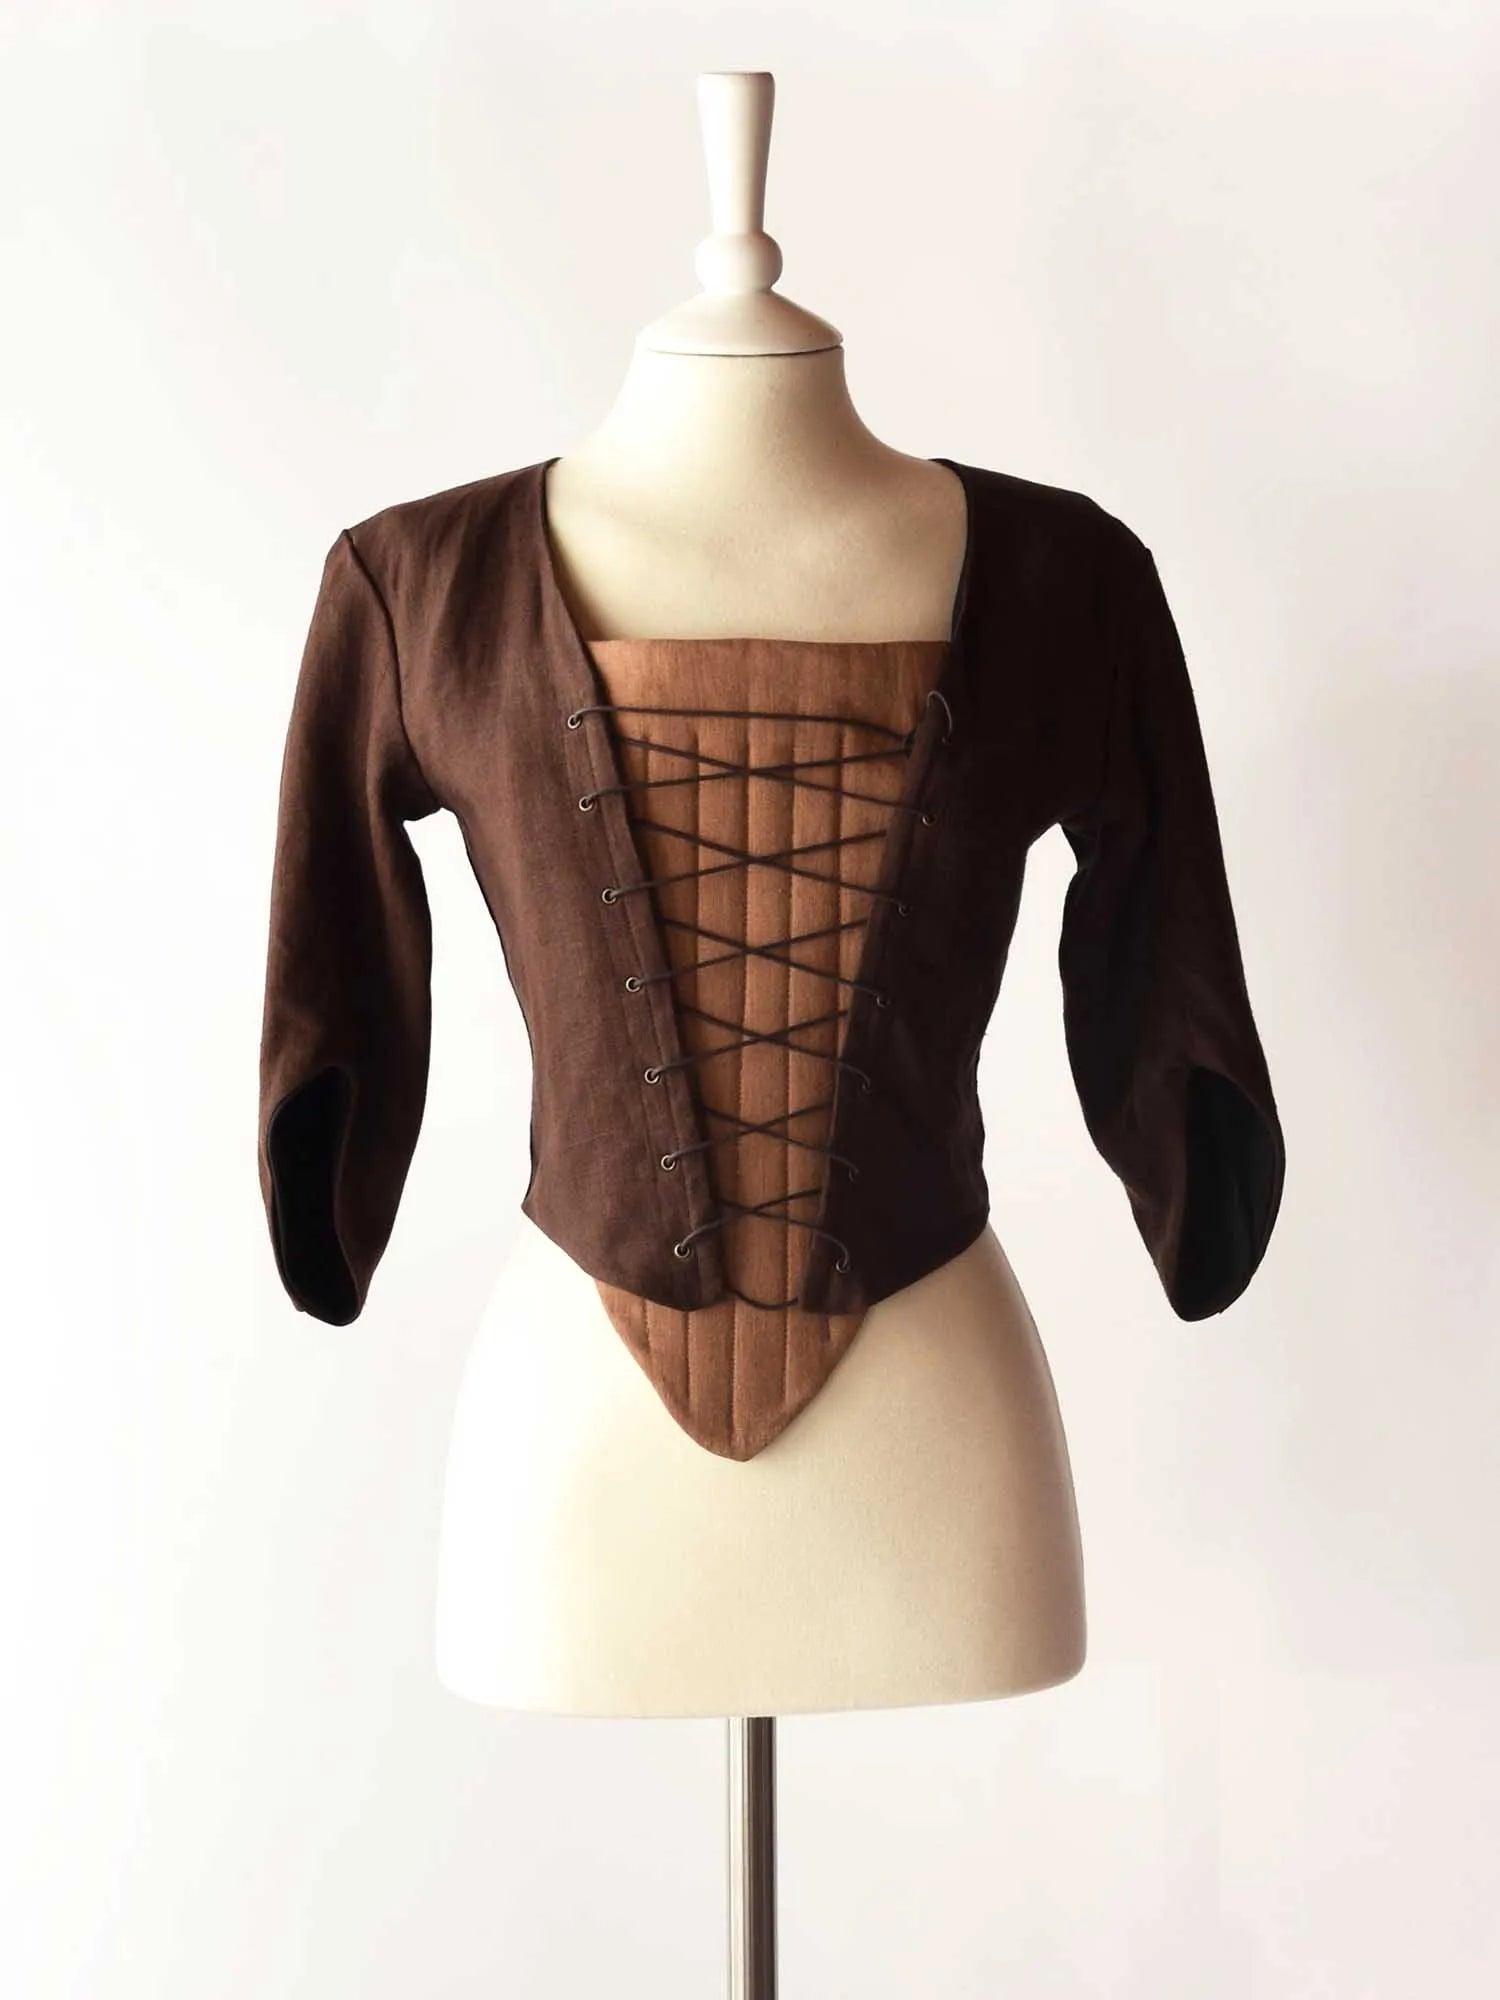 Lace-Up Bodice in Chocolate Linen - Atelier Serraspina